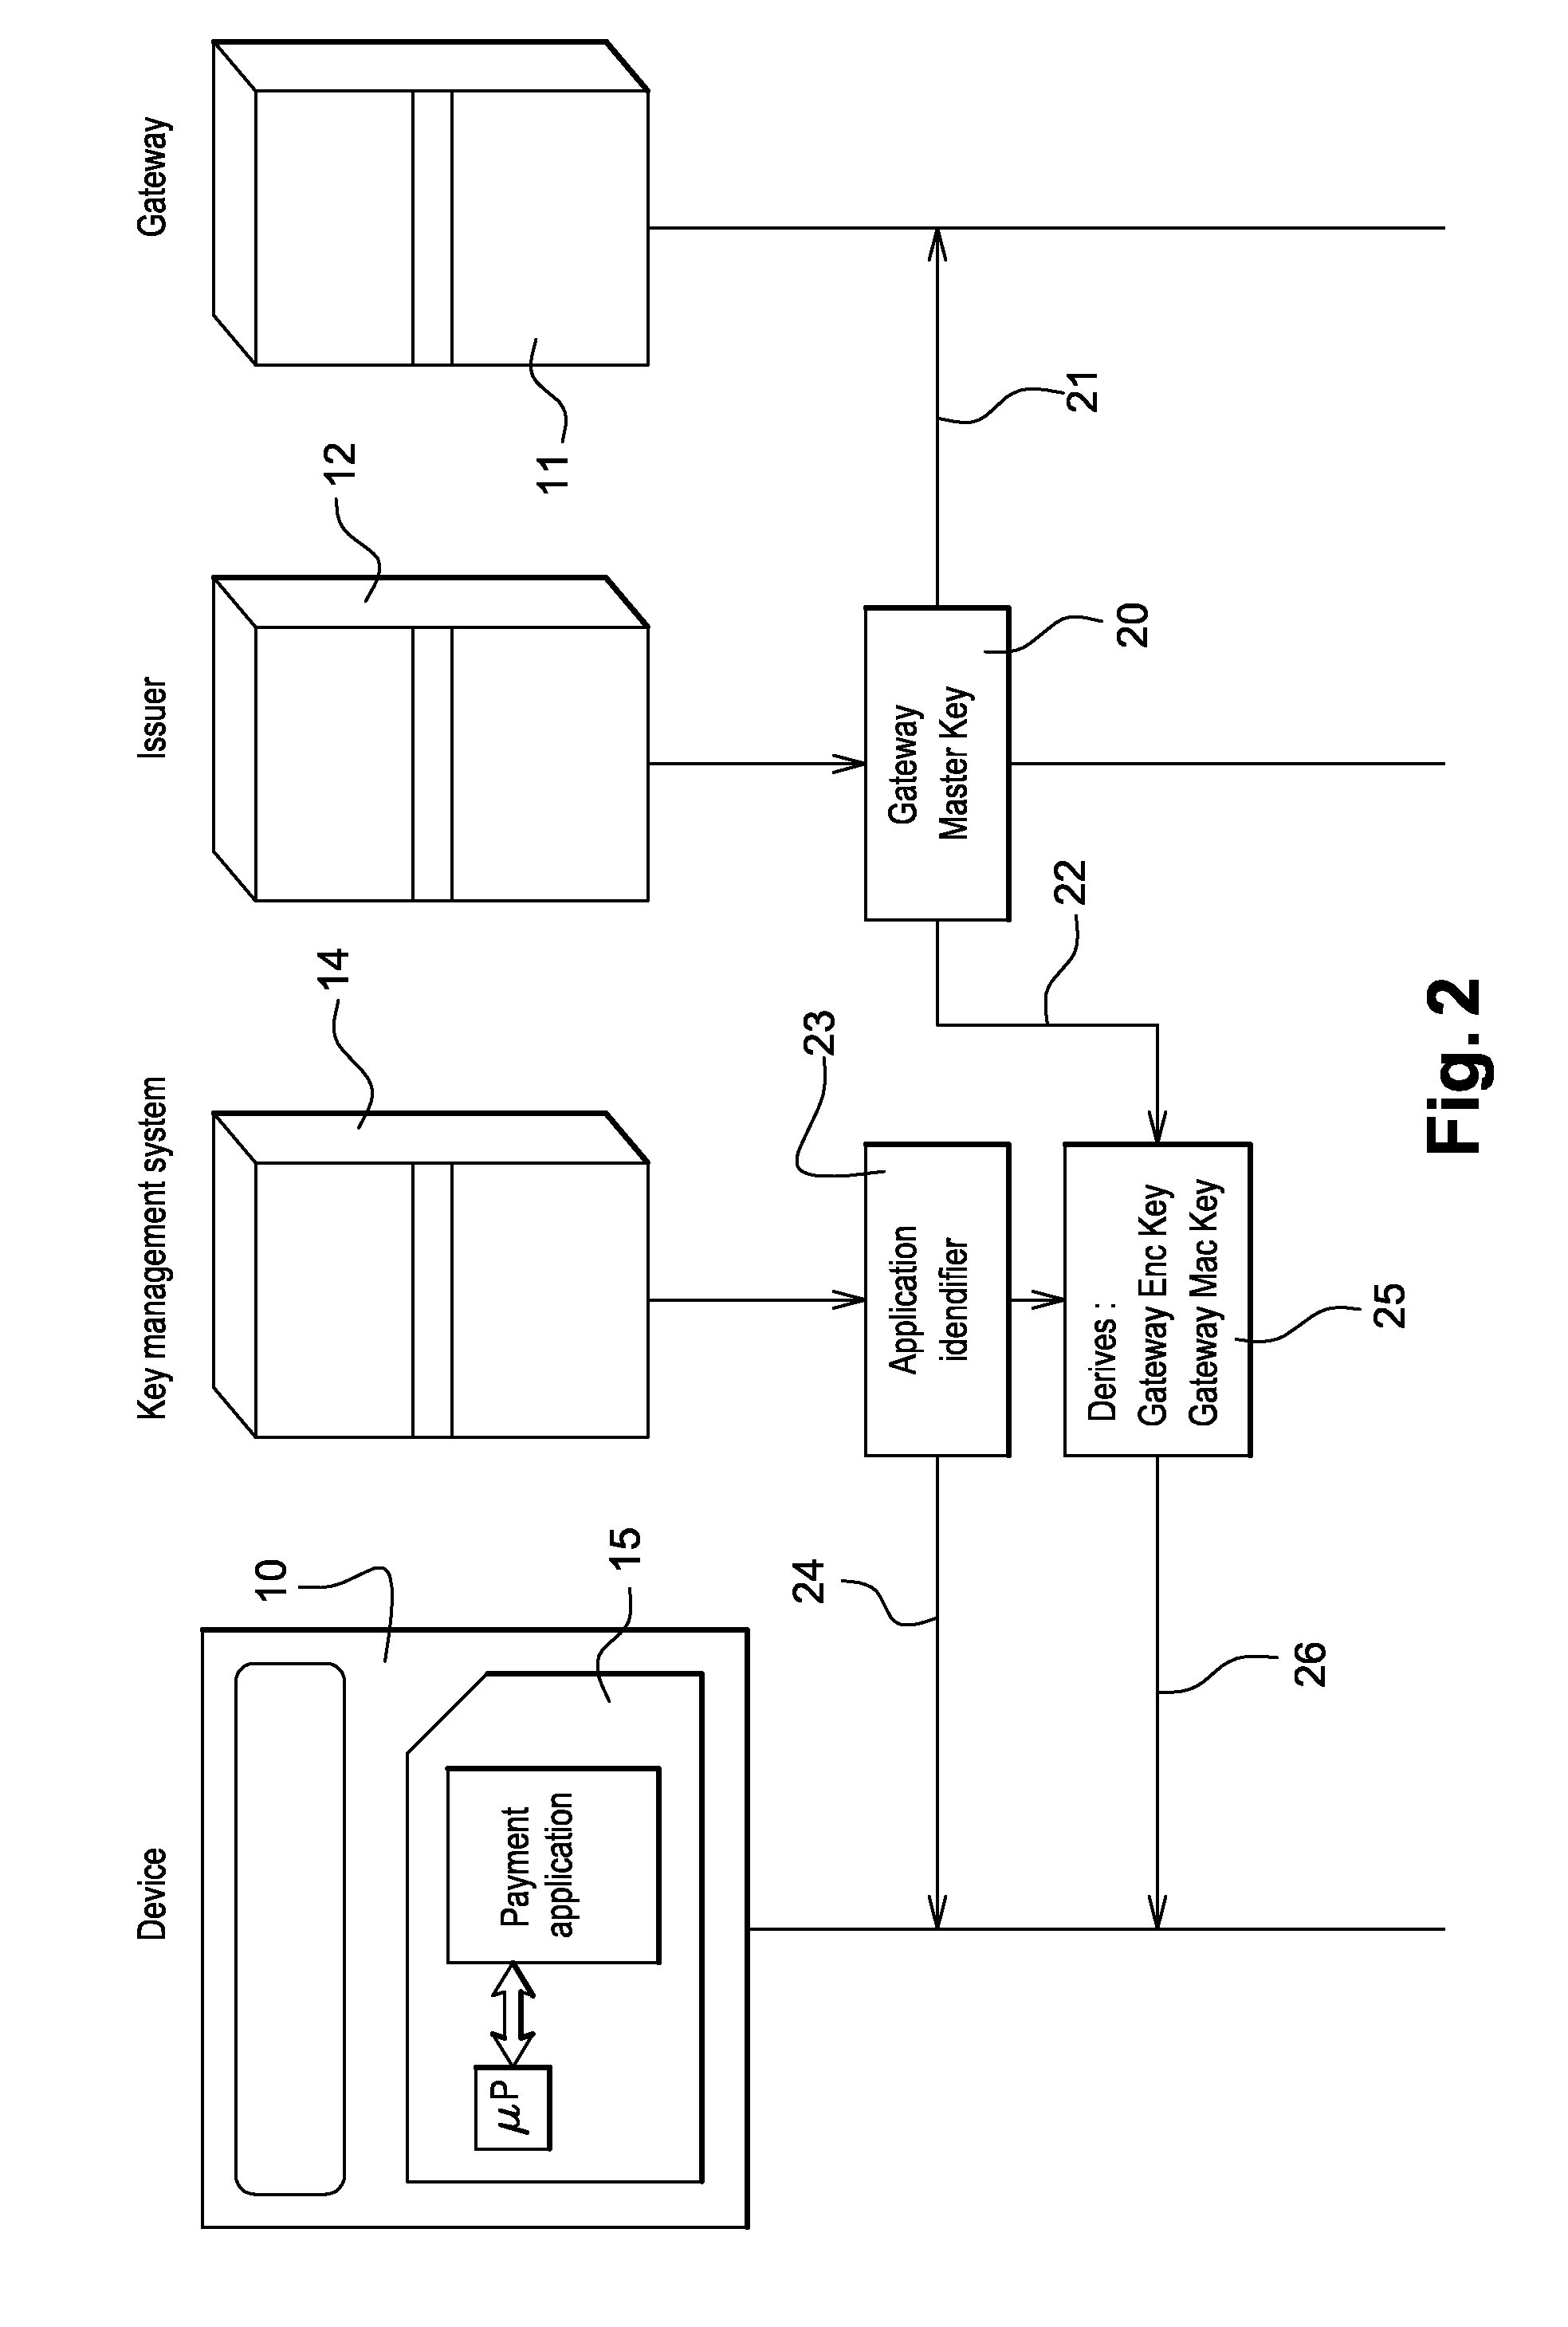 Method for securing over-the-air communication between a mobile application and a gateway